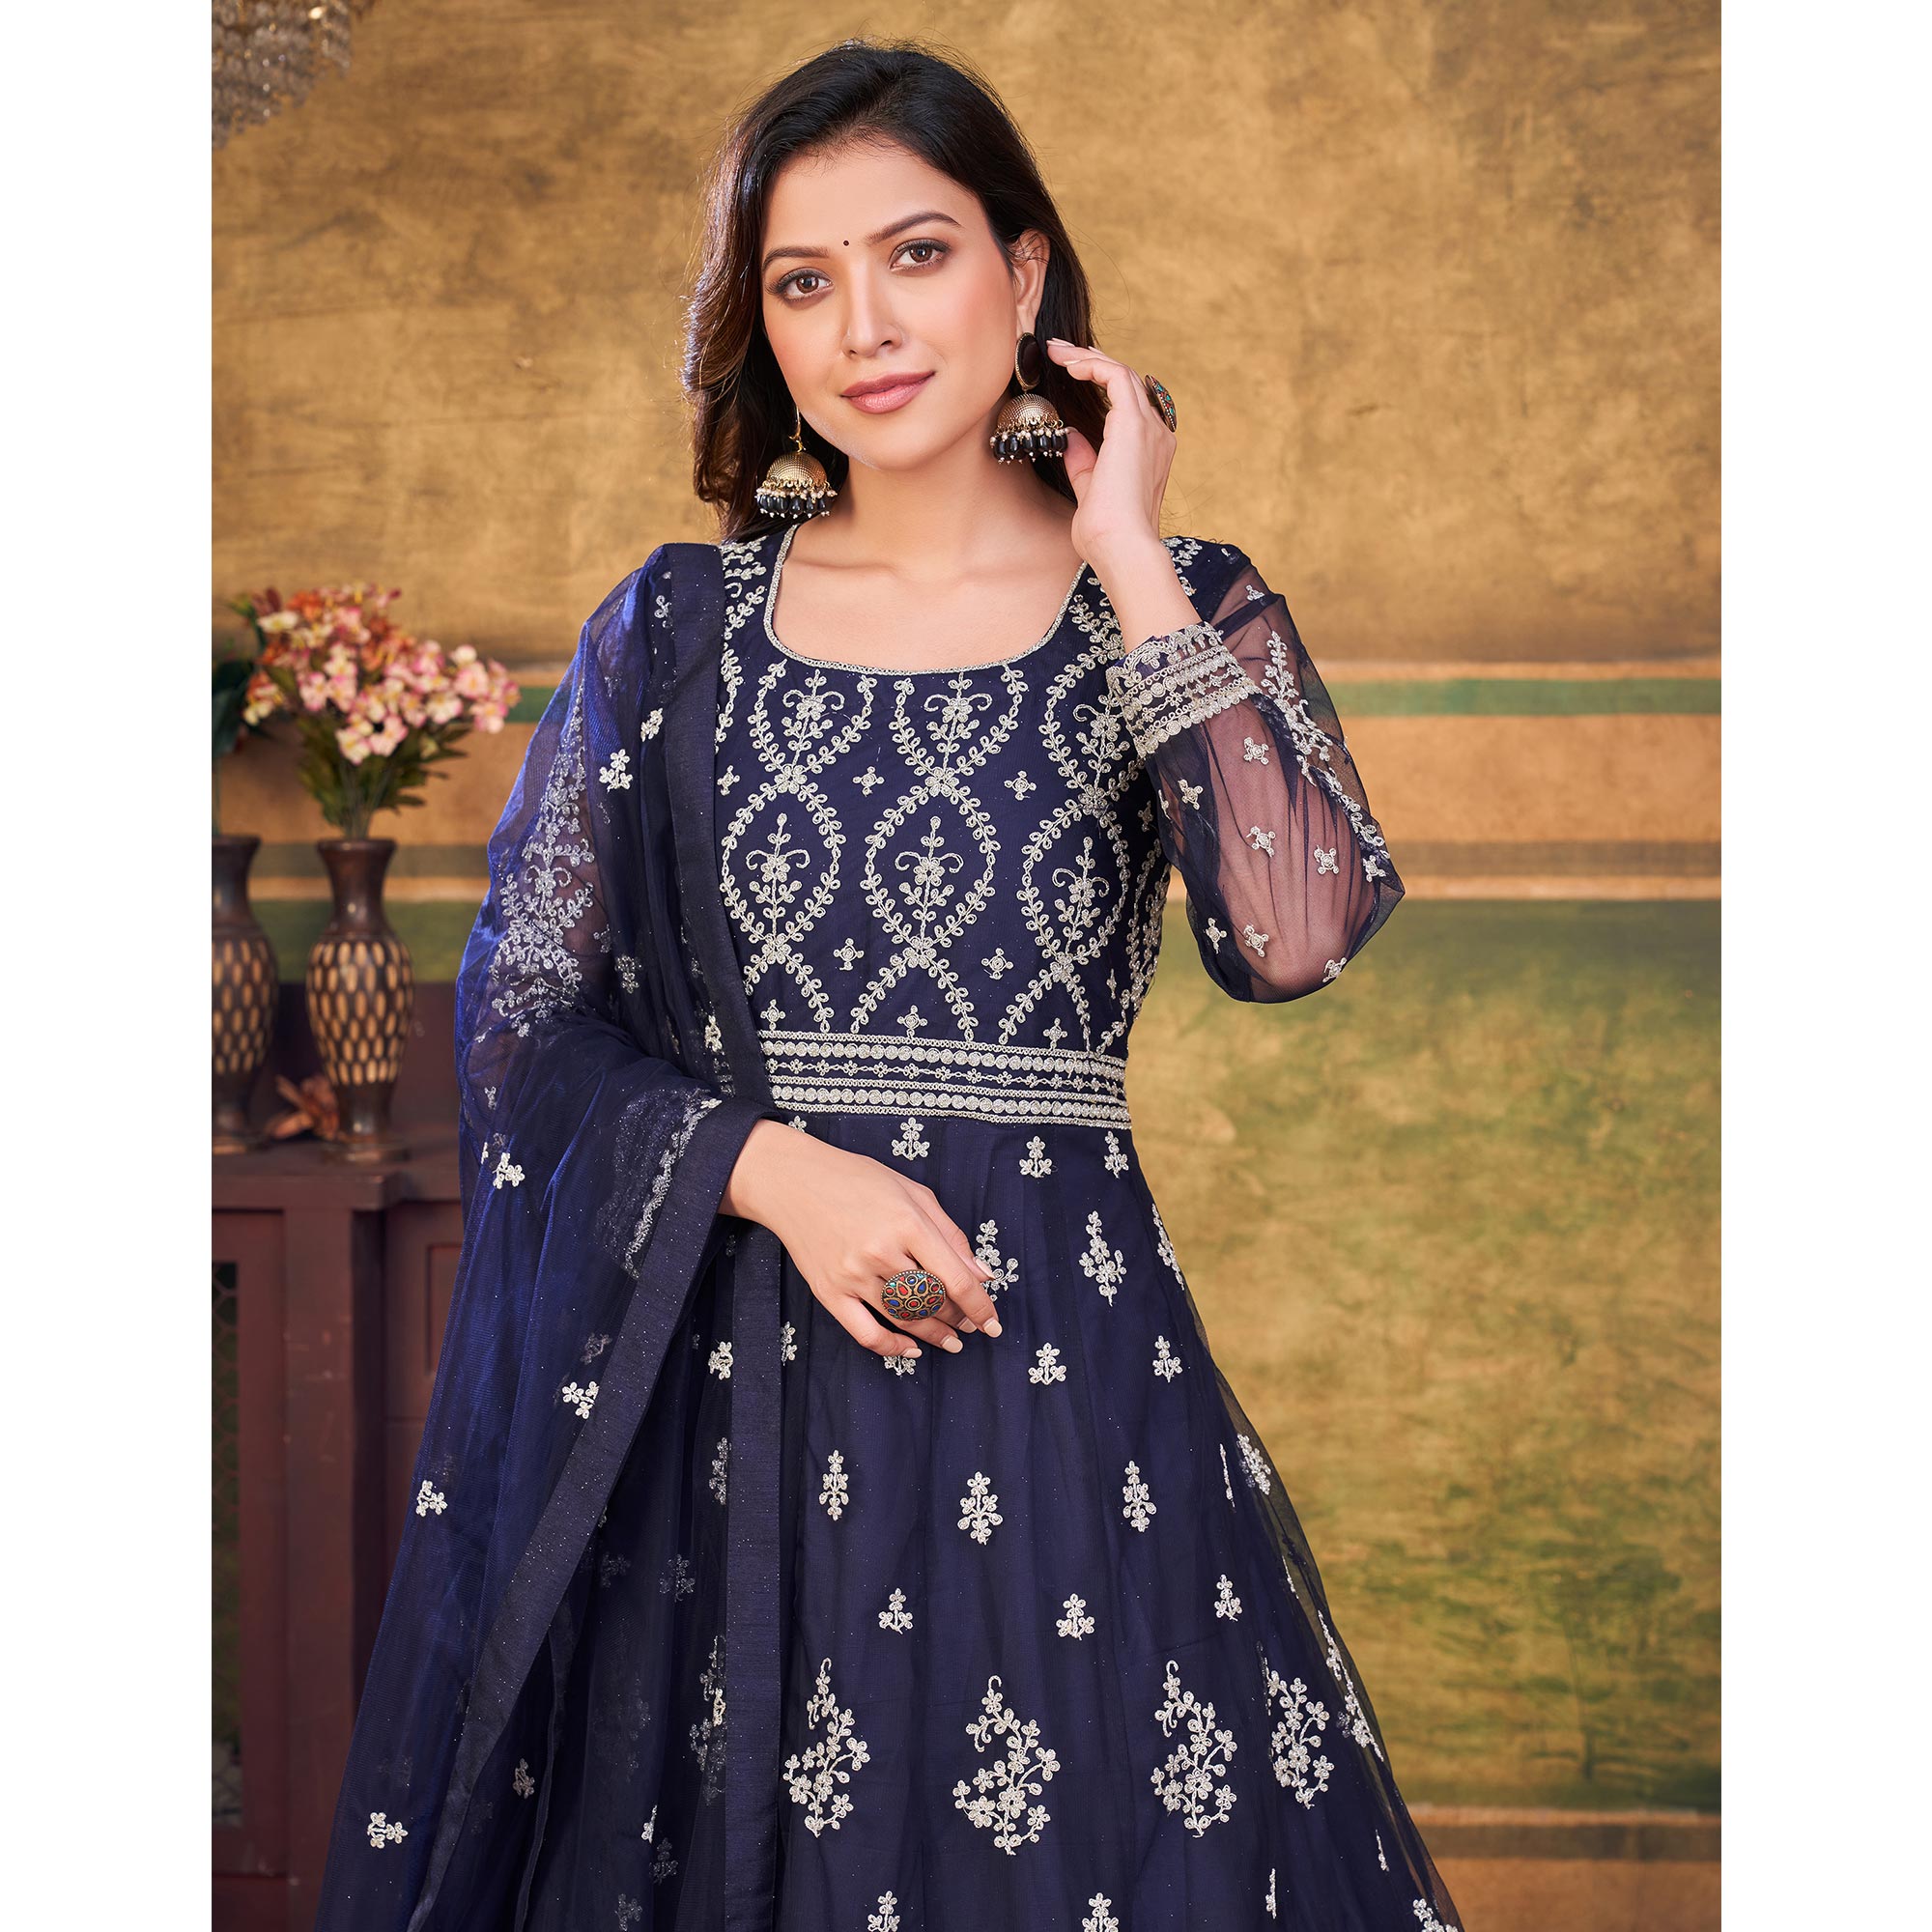 Blue Embroidered Net Semi Stitched Anarkali Suit